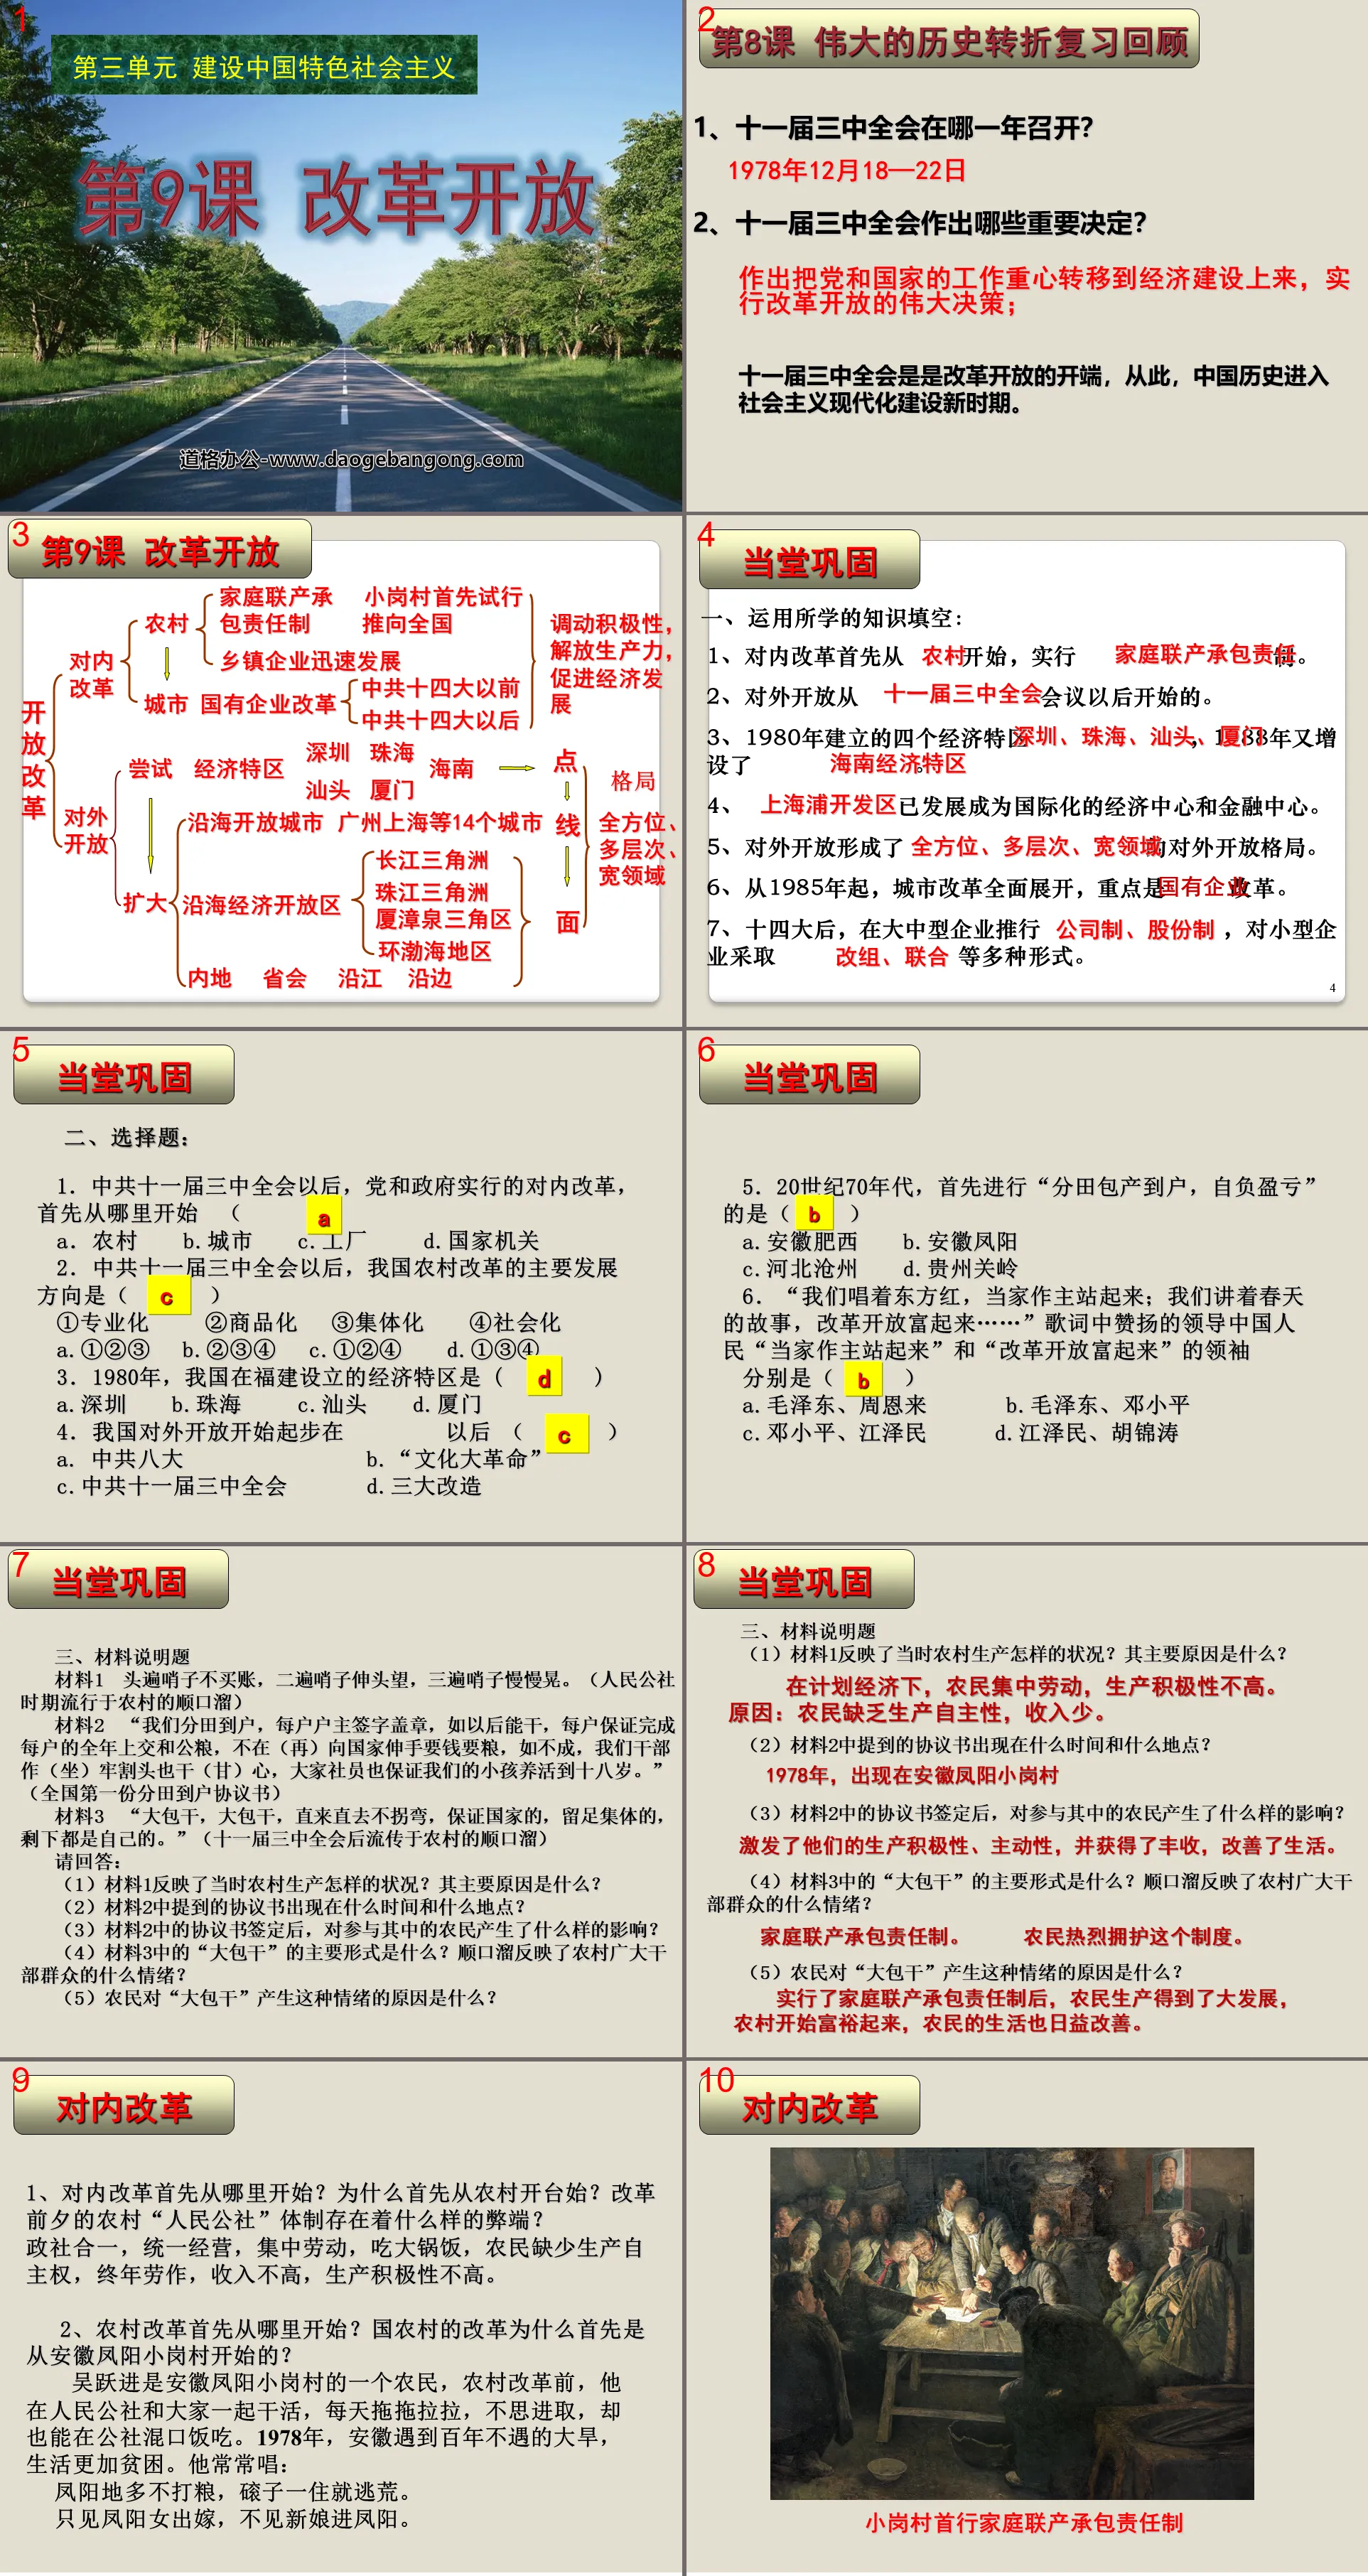 "Reform and Opening Up" Building Socialism with Chinese Characteristics PPT Courseware 4